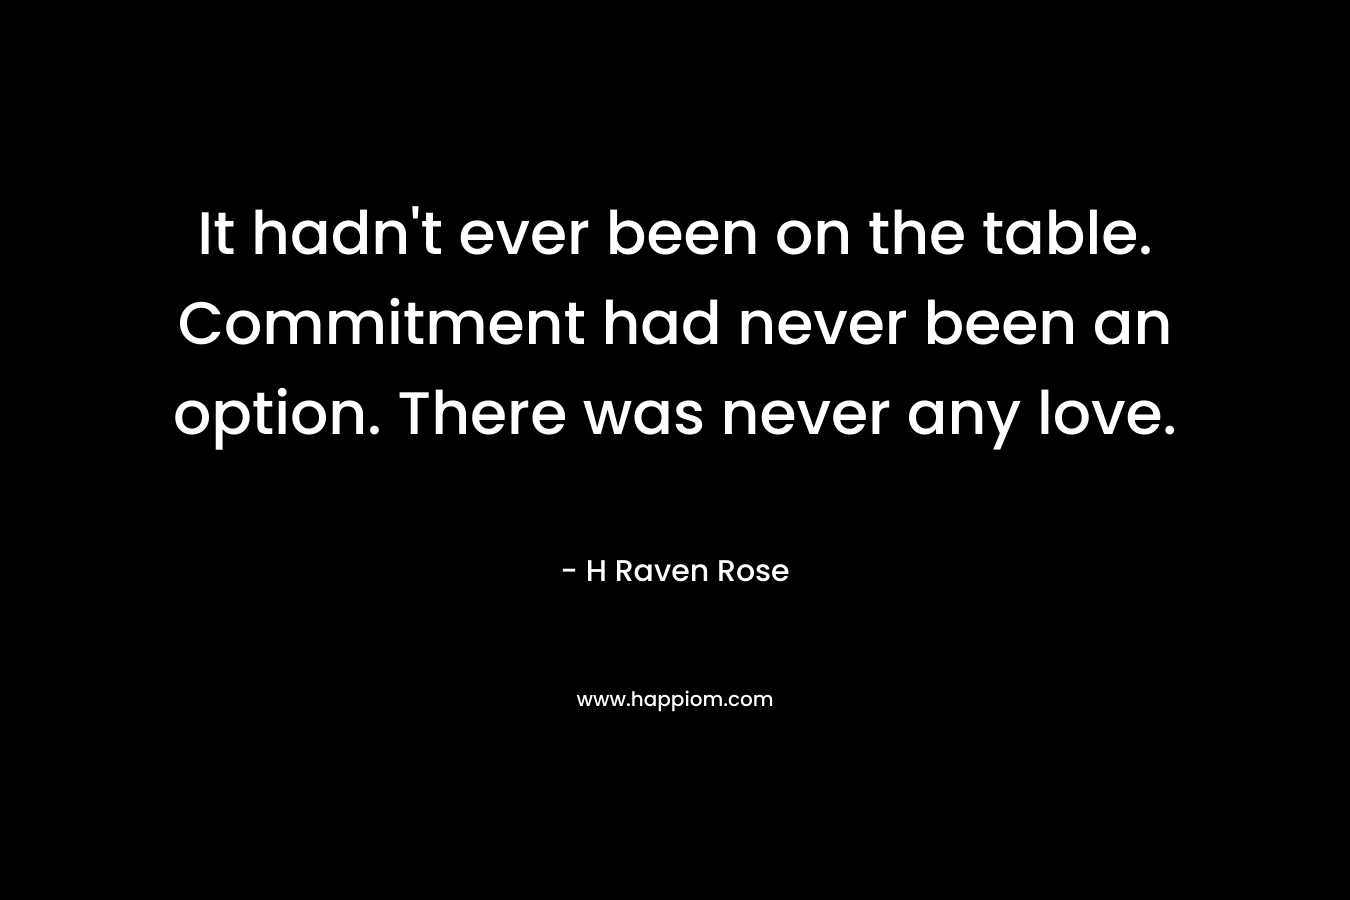 It hadn’t ever been on the table. Commitment had never been an option. There was never any love. – H Raven Rose